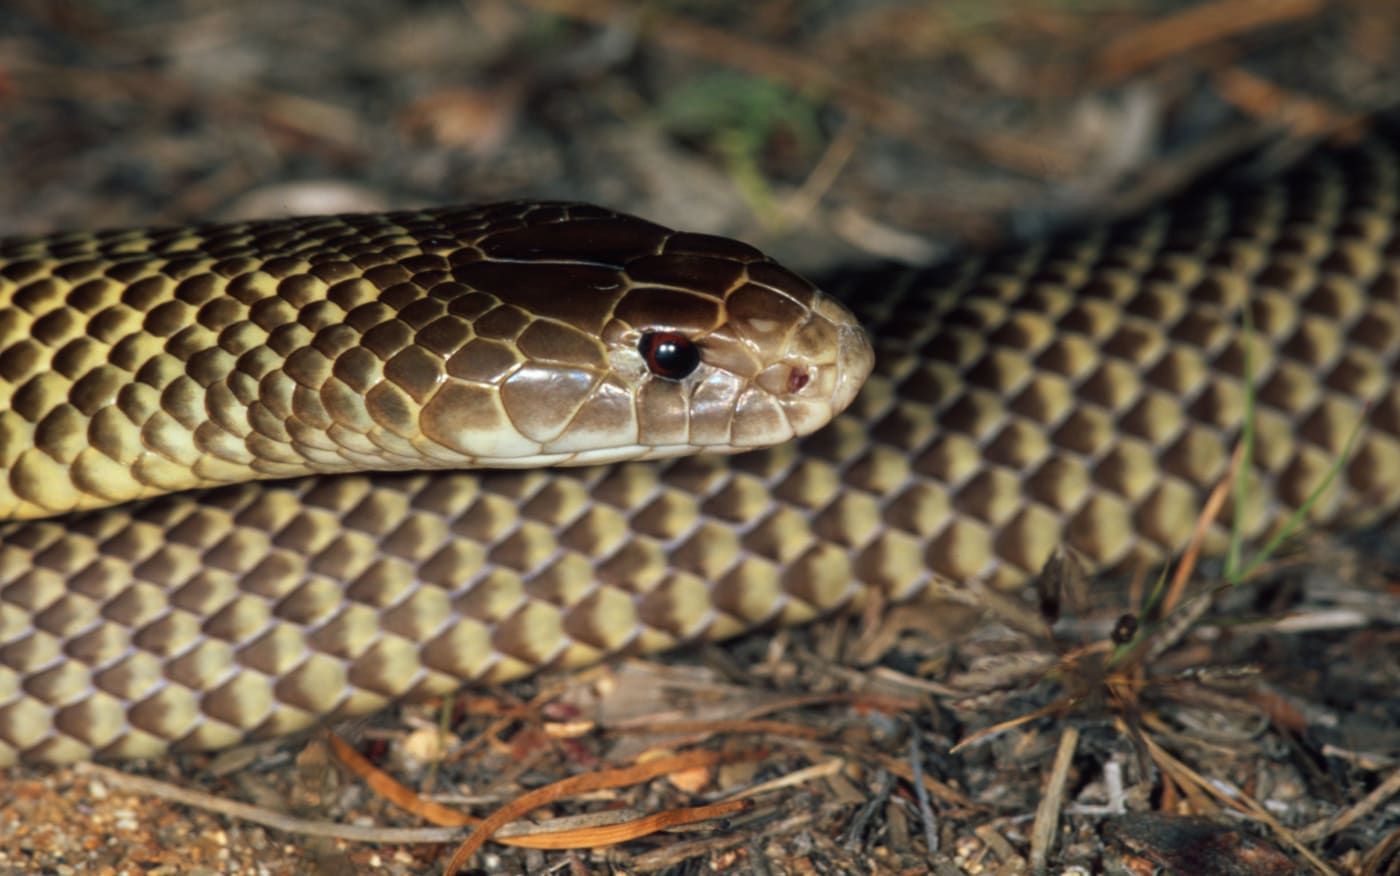 Pseudechis australis King brown snake One of the most venomous snakes in the world, Australia